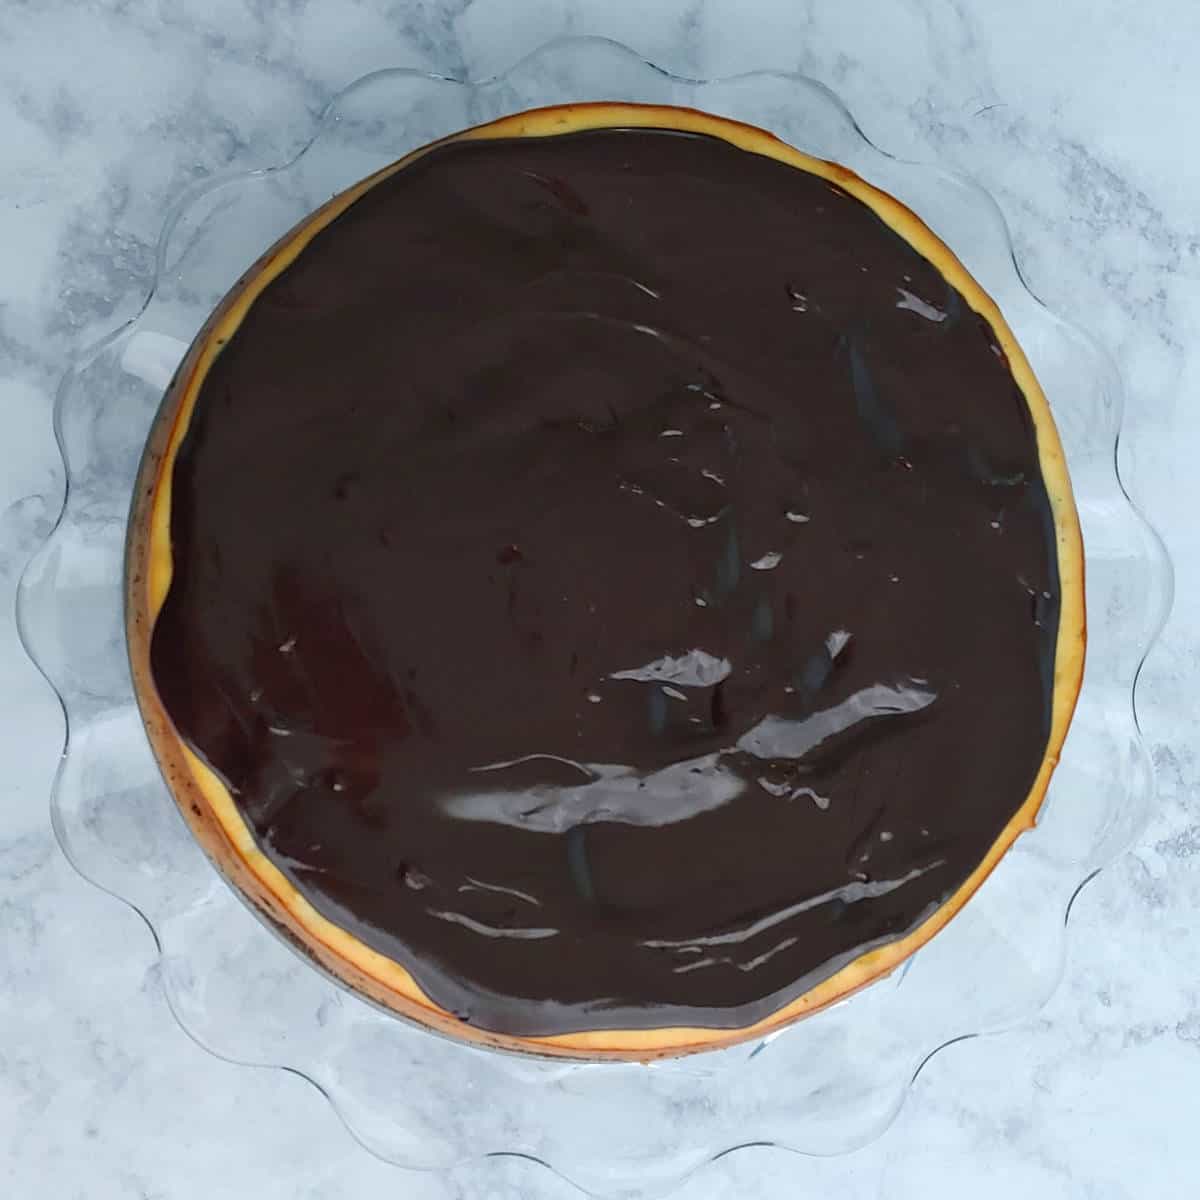 cheesecake topped with chocolate ganache